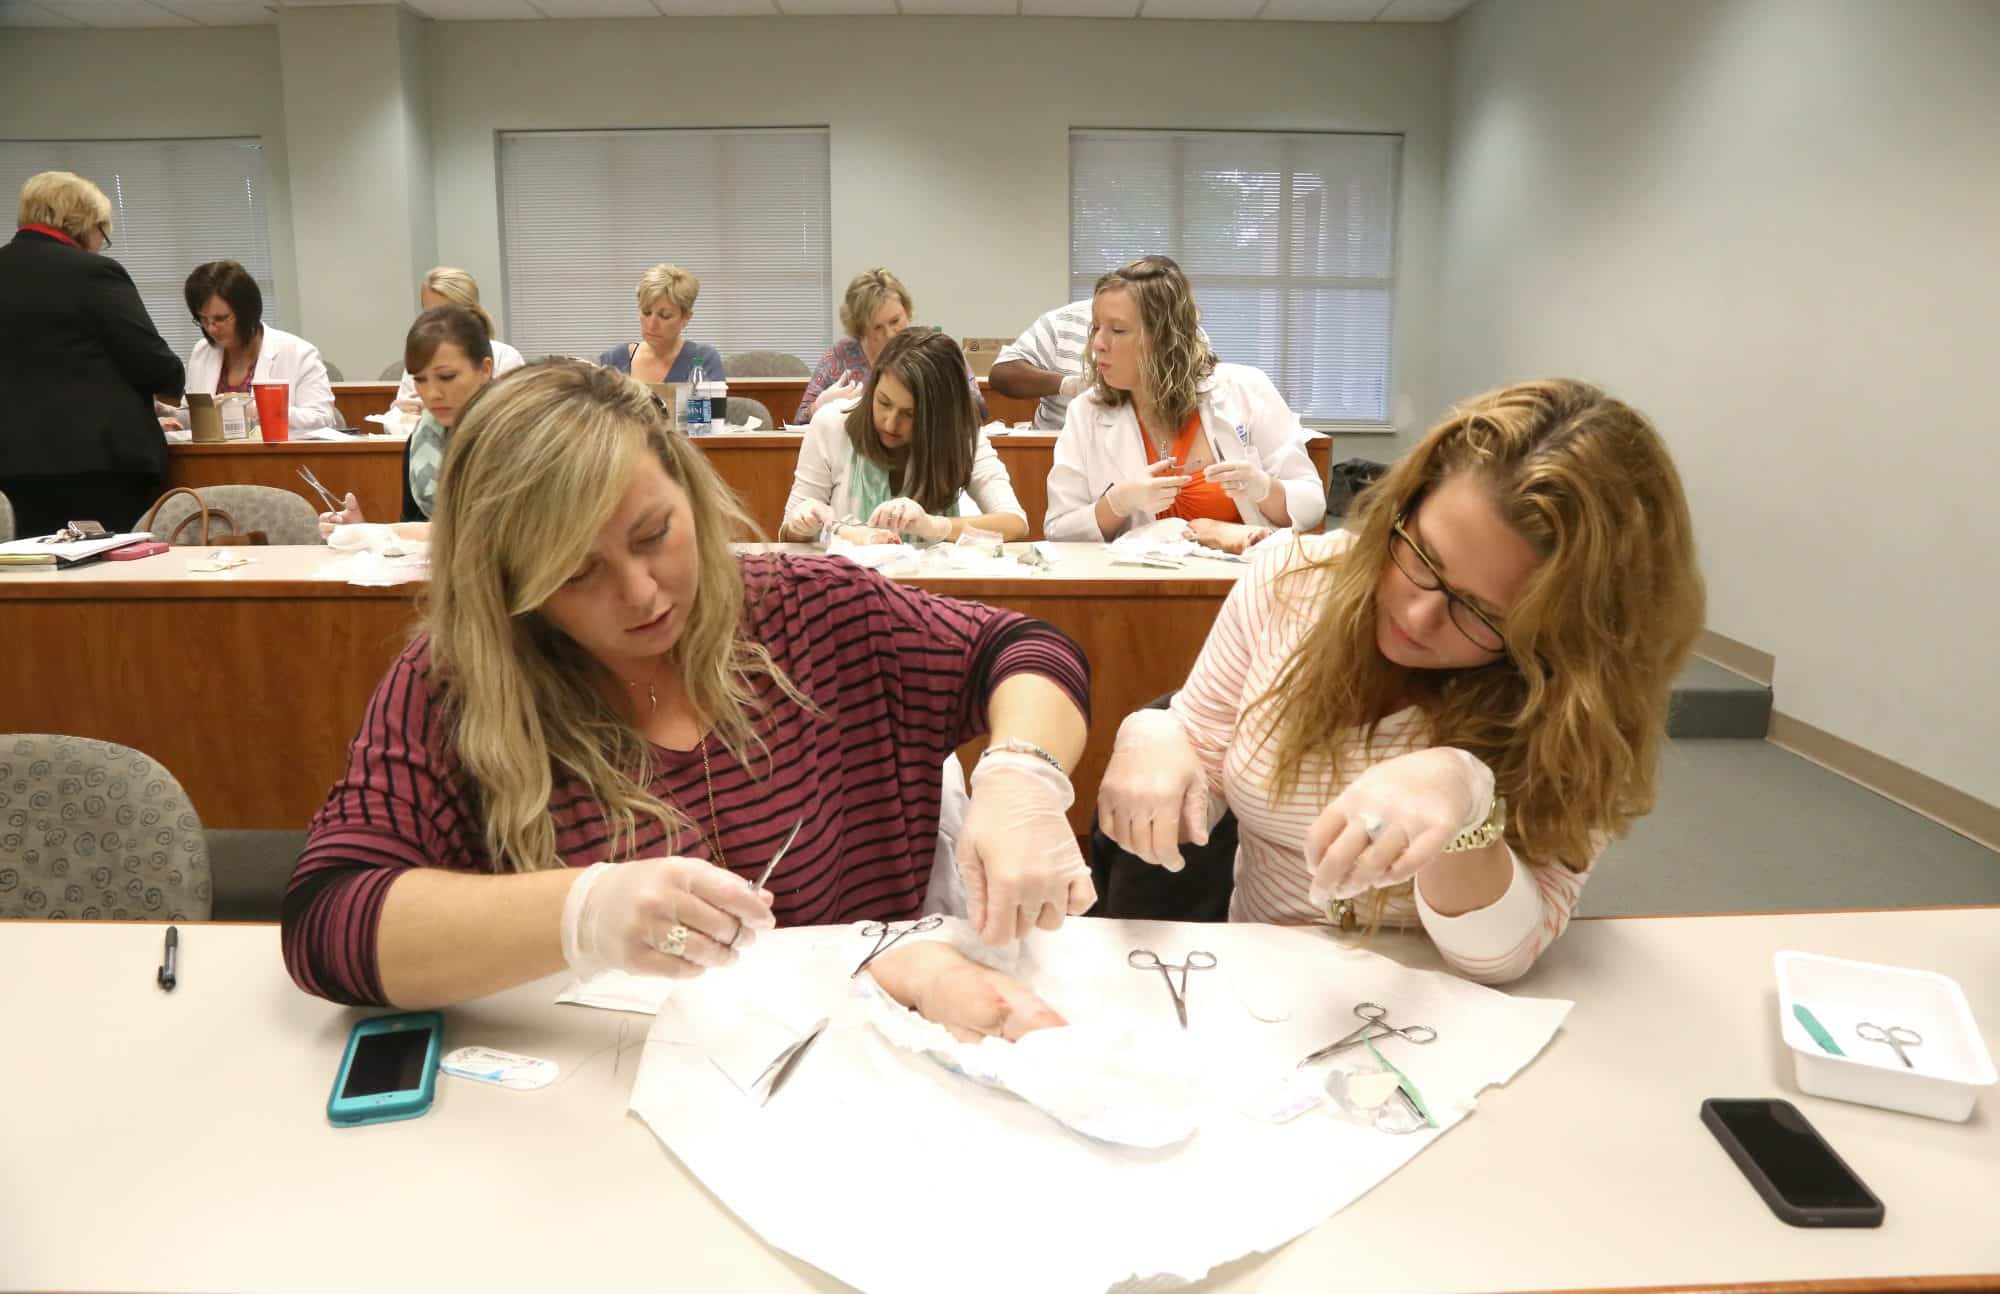 FMU Health Sciences offering scholarships for APRN students